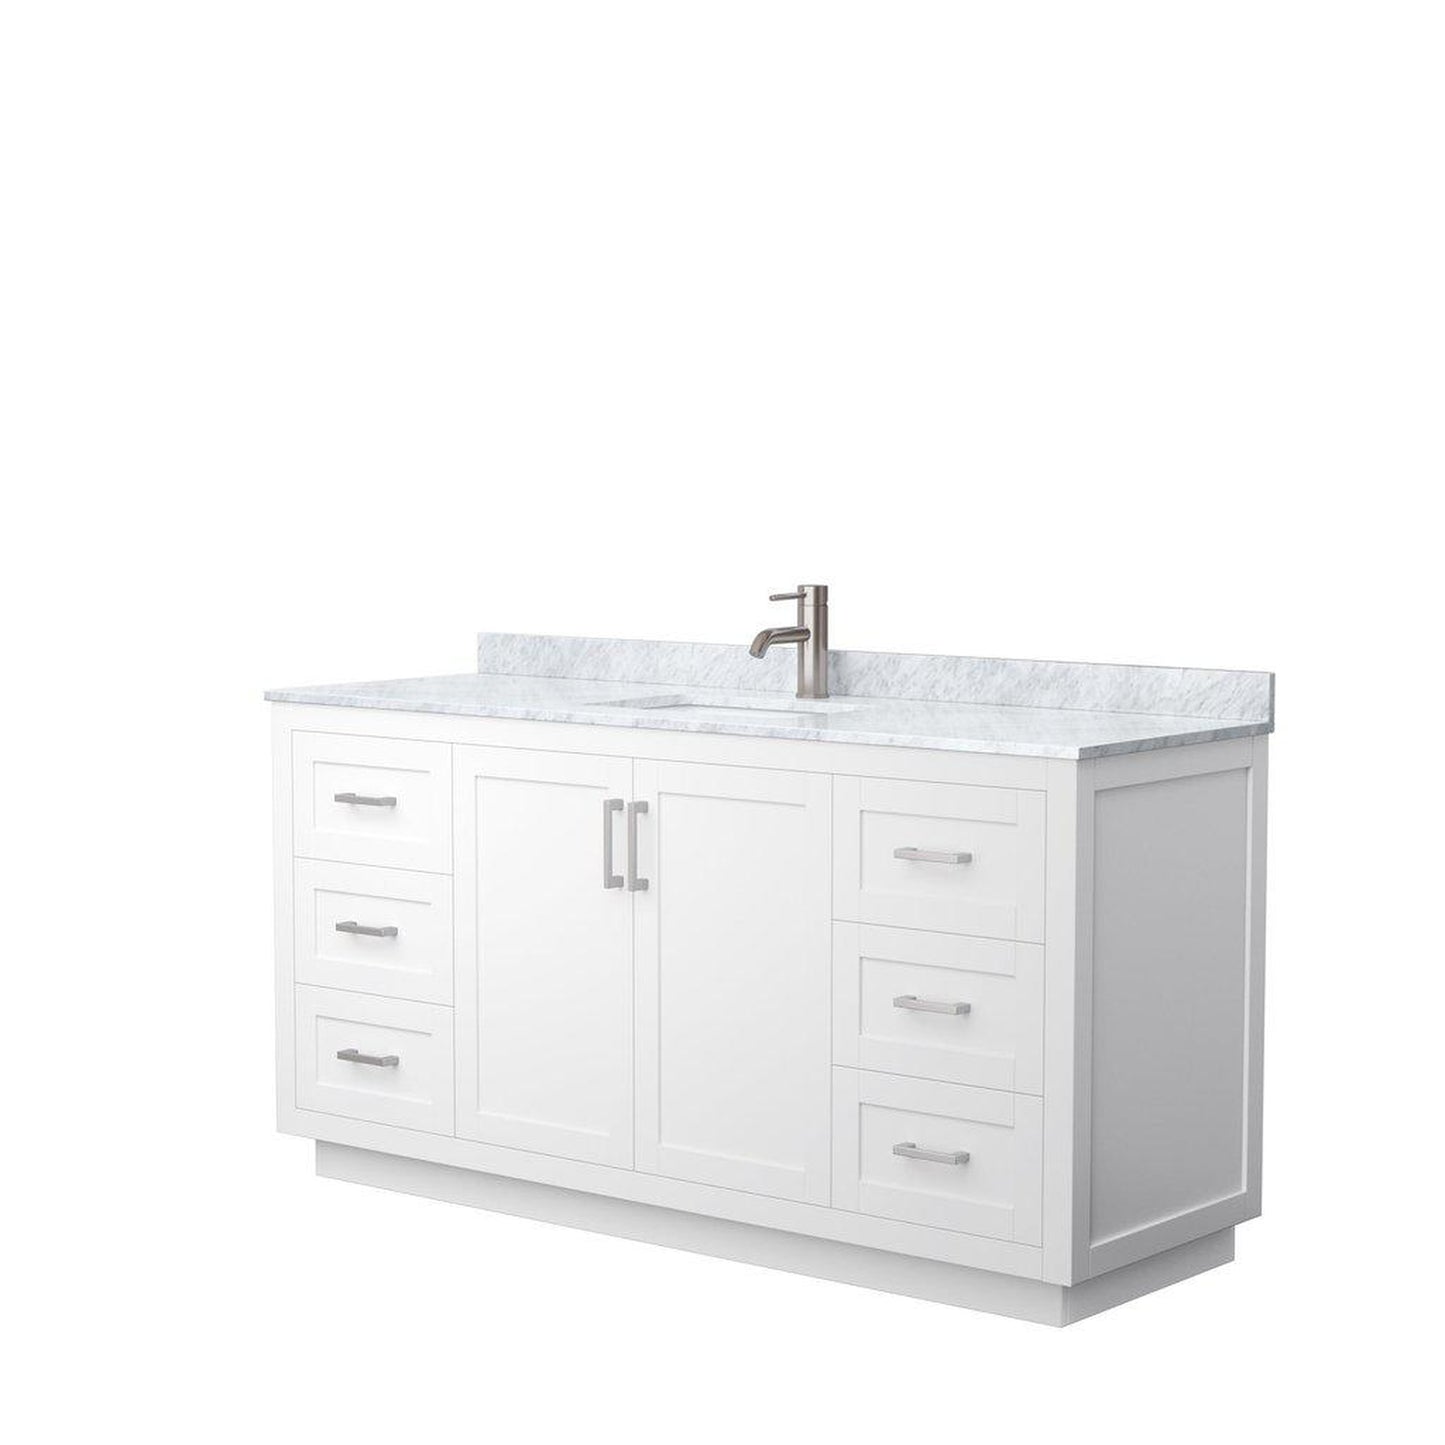 Wyndham Collection Miranda 66" Single Bathroom White Vanity Set With White Carrara Marble Countertop, Undermount Square Sink, And Brushed Nickel Trim